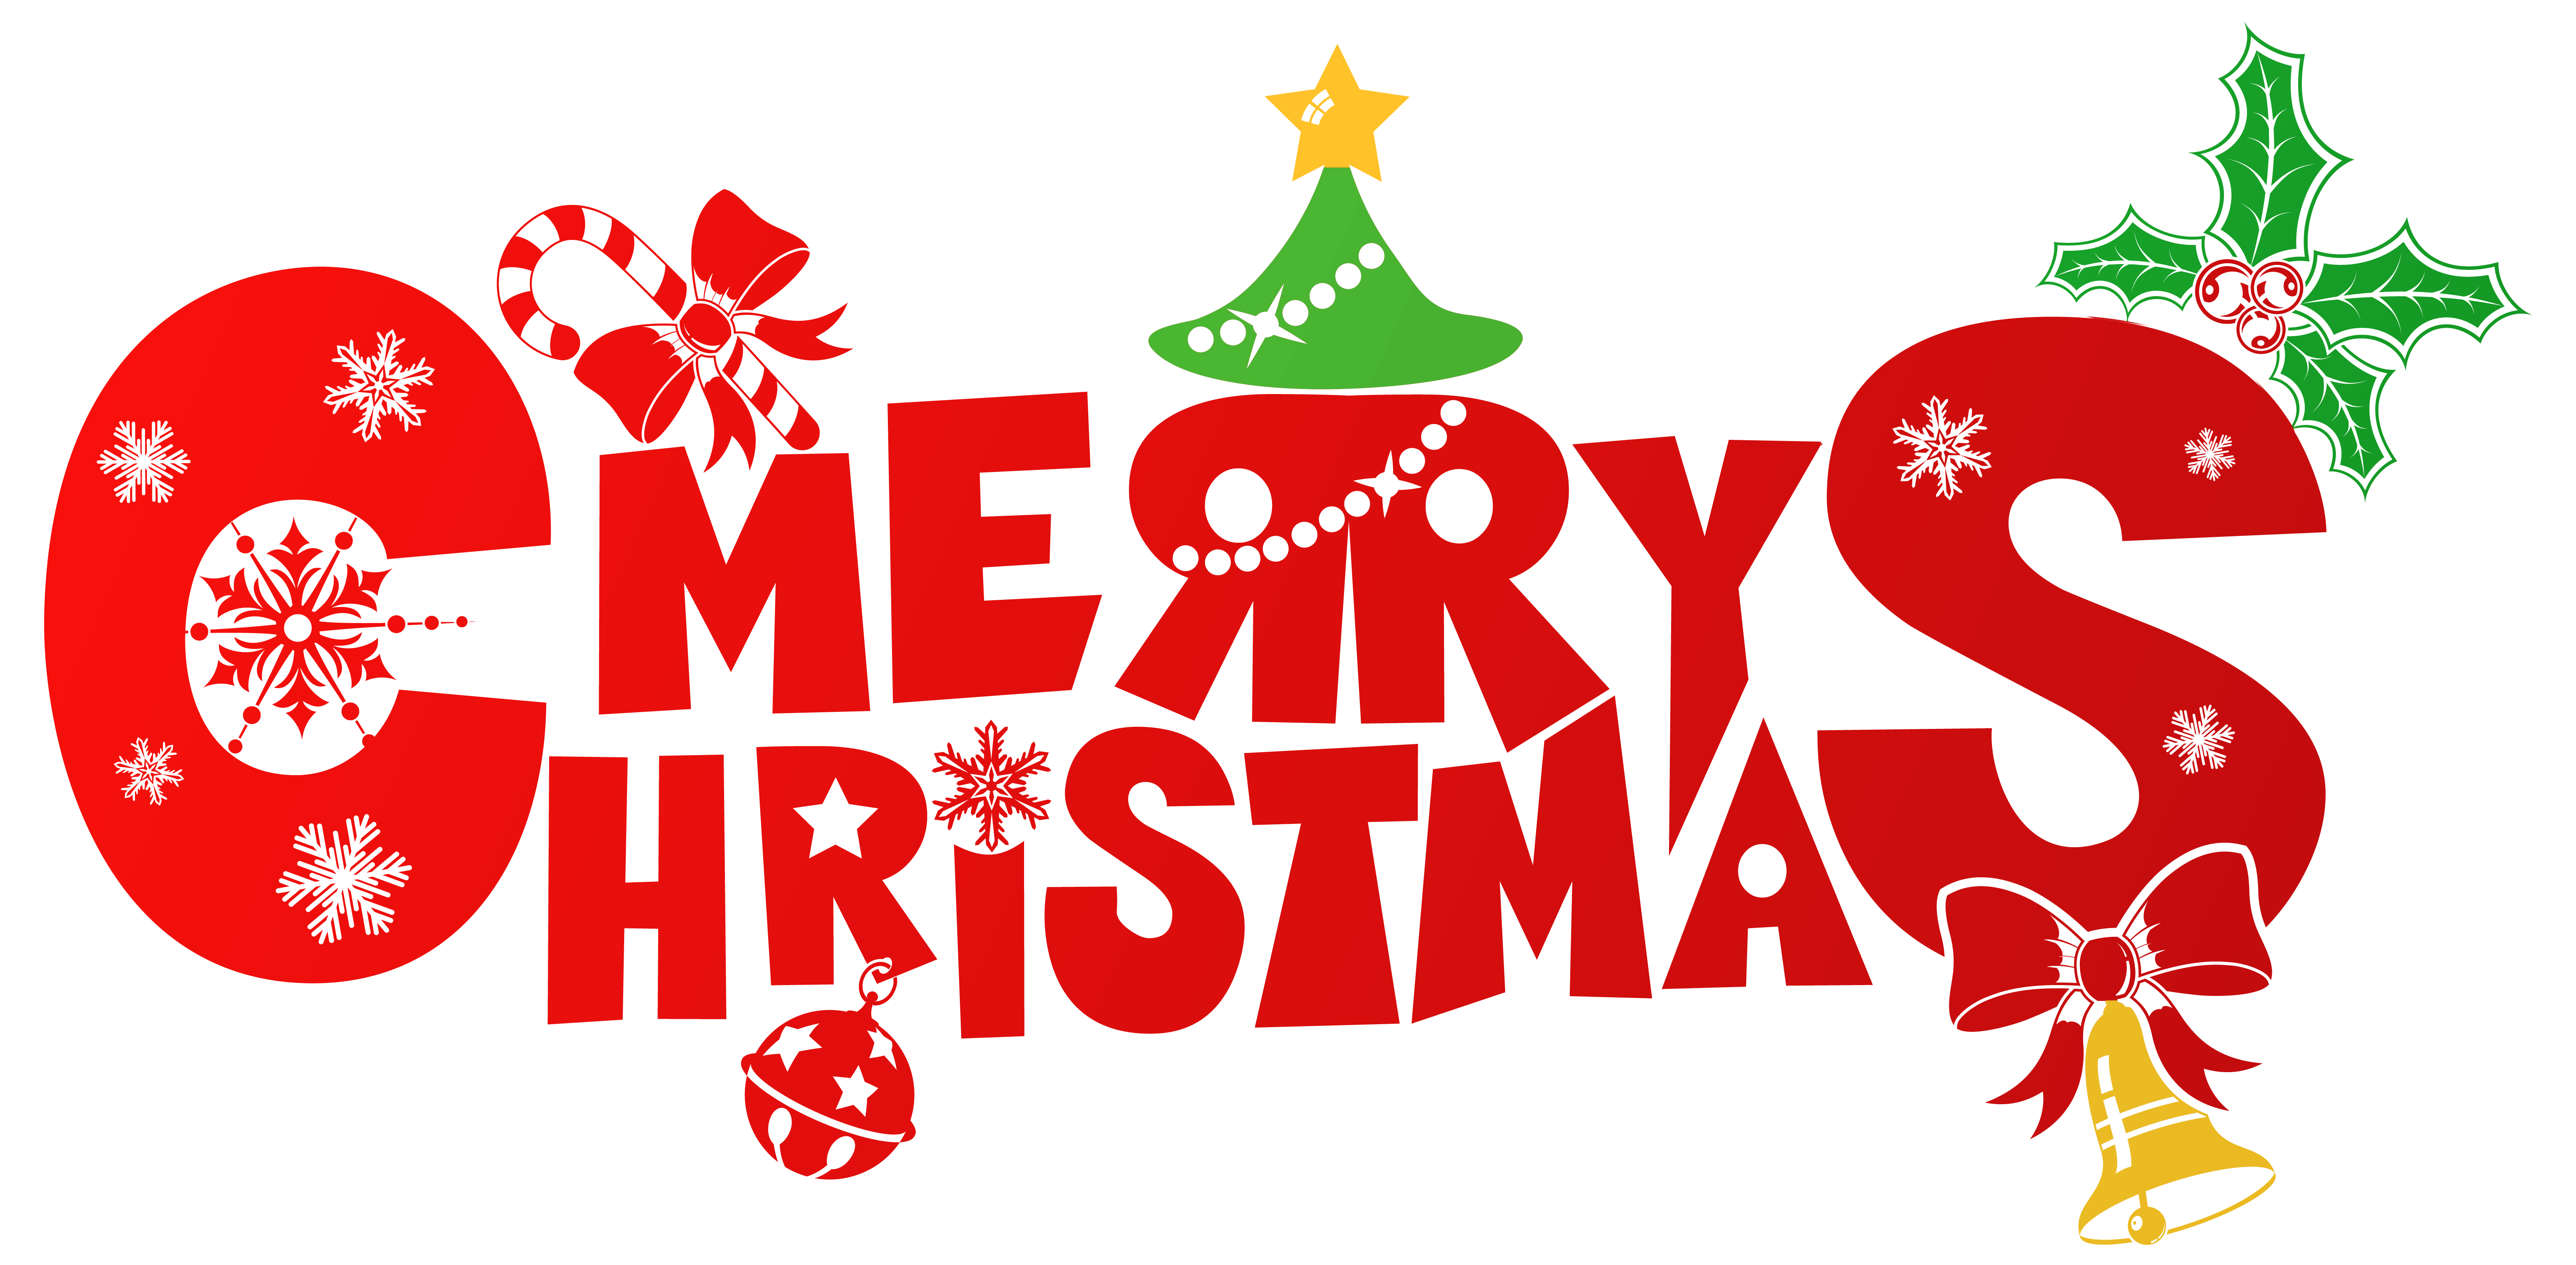 Red Merry Christmas PNG Clipart Image Quality Image And Transparent PNG Free Clipart